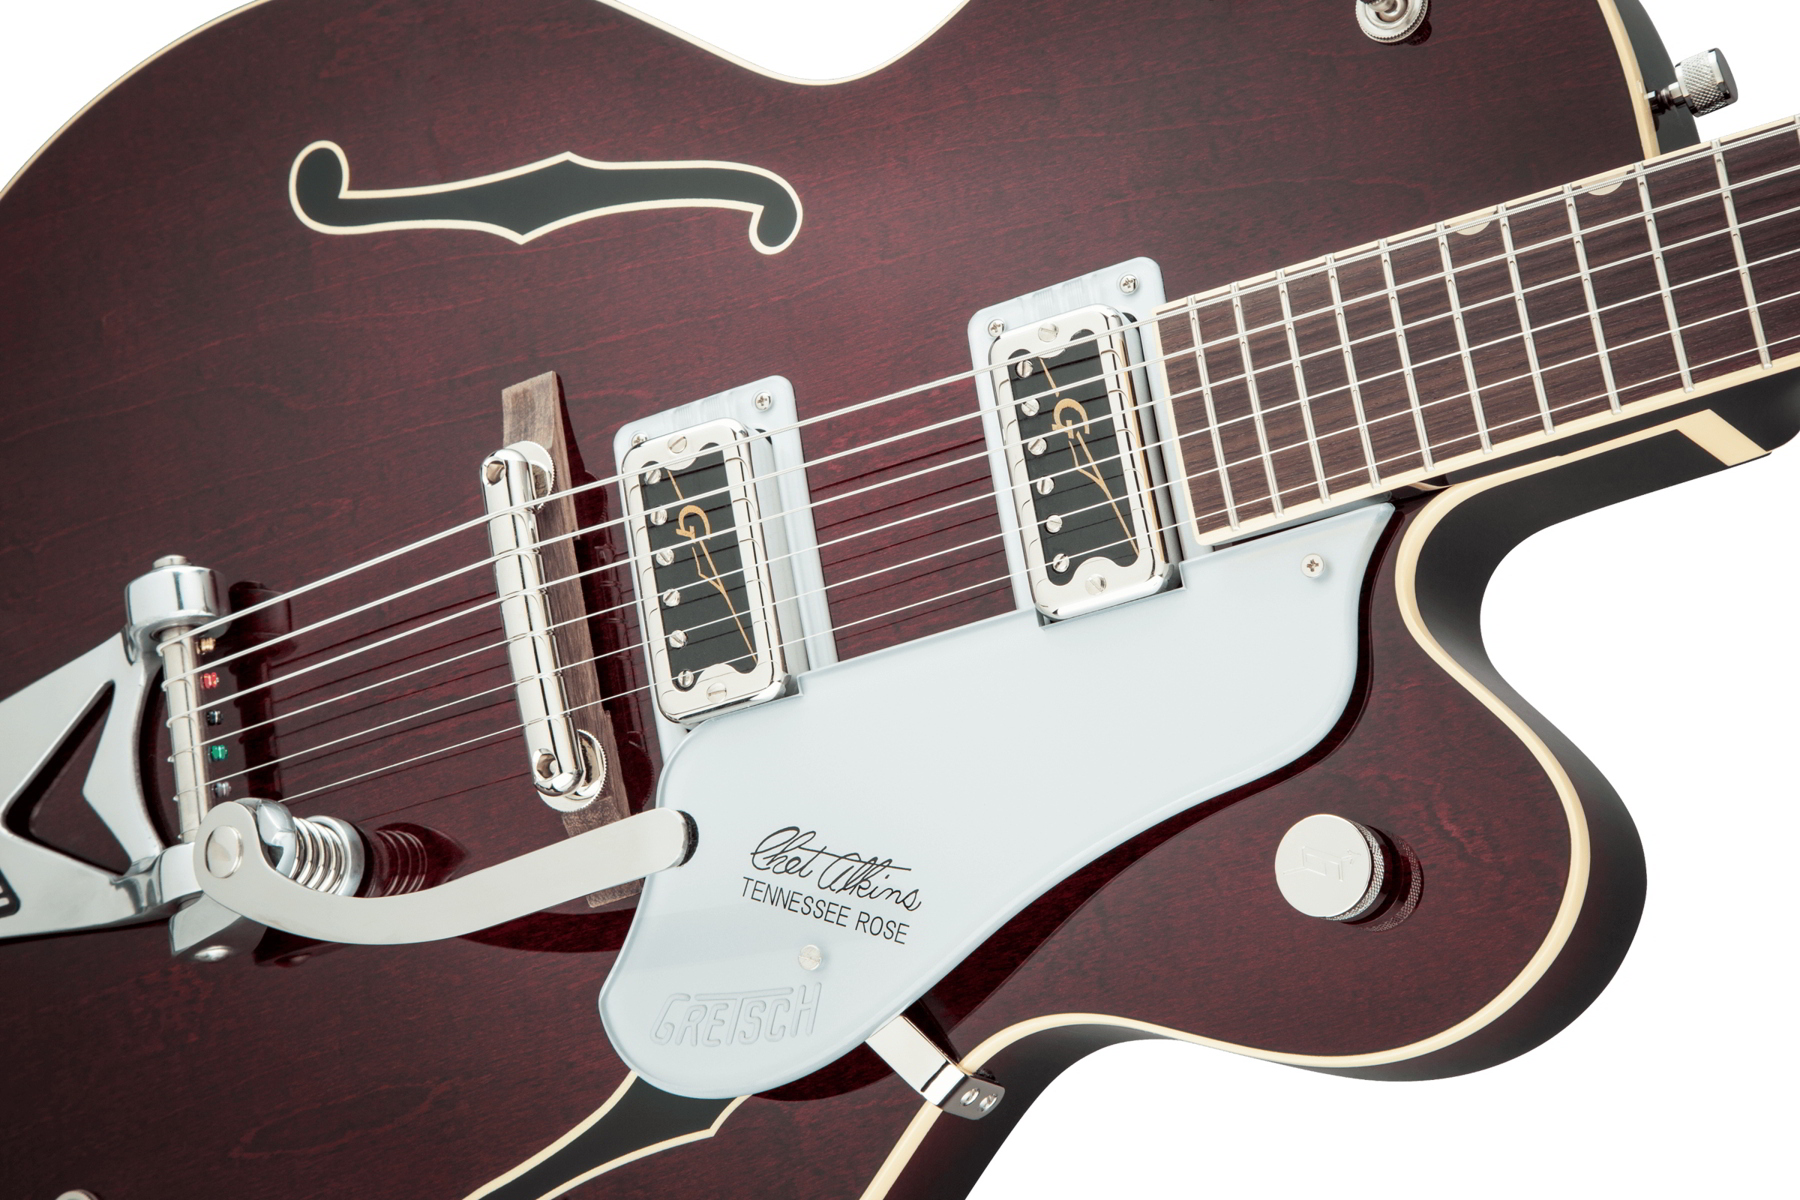 G6119T-62 Vintage Select Edition '62 Tennessee Rose™ Hollow Body with Bigsby®, TV Jones®, Dark Cherry Stain追加画像